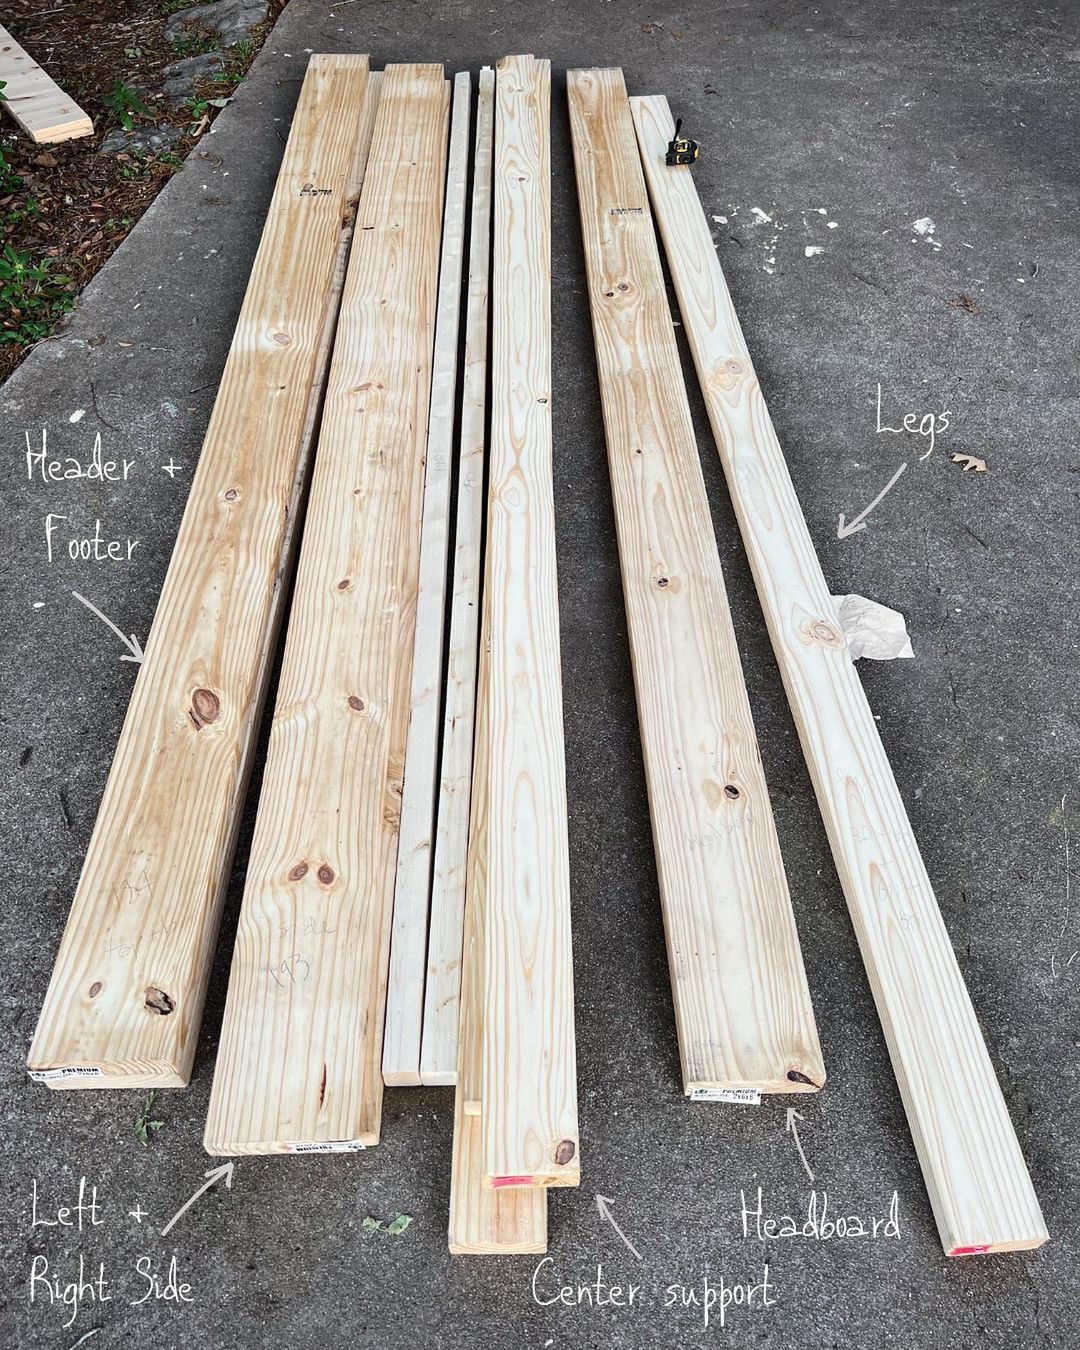 Lumber used for the project